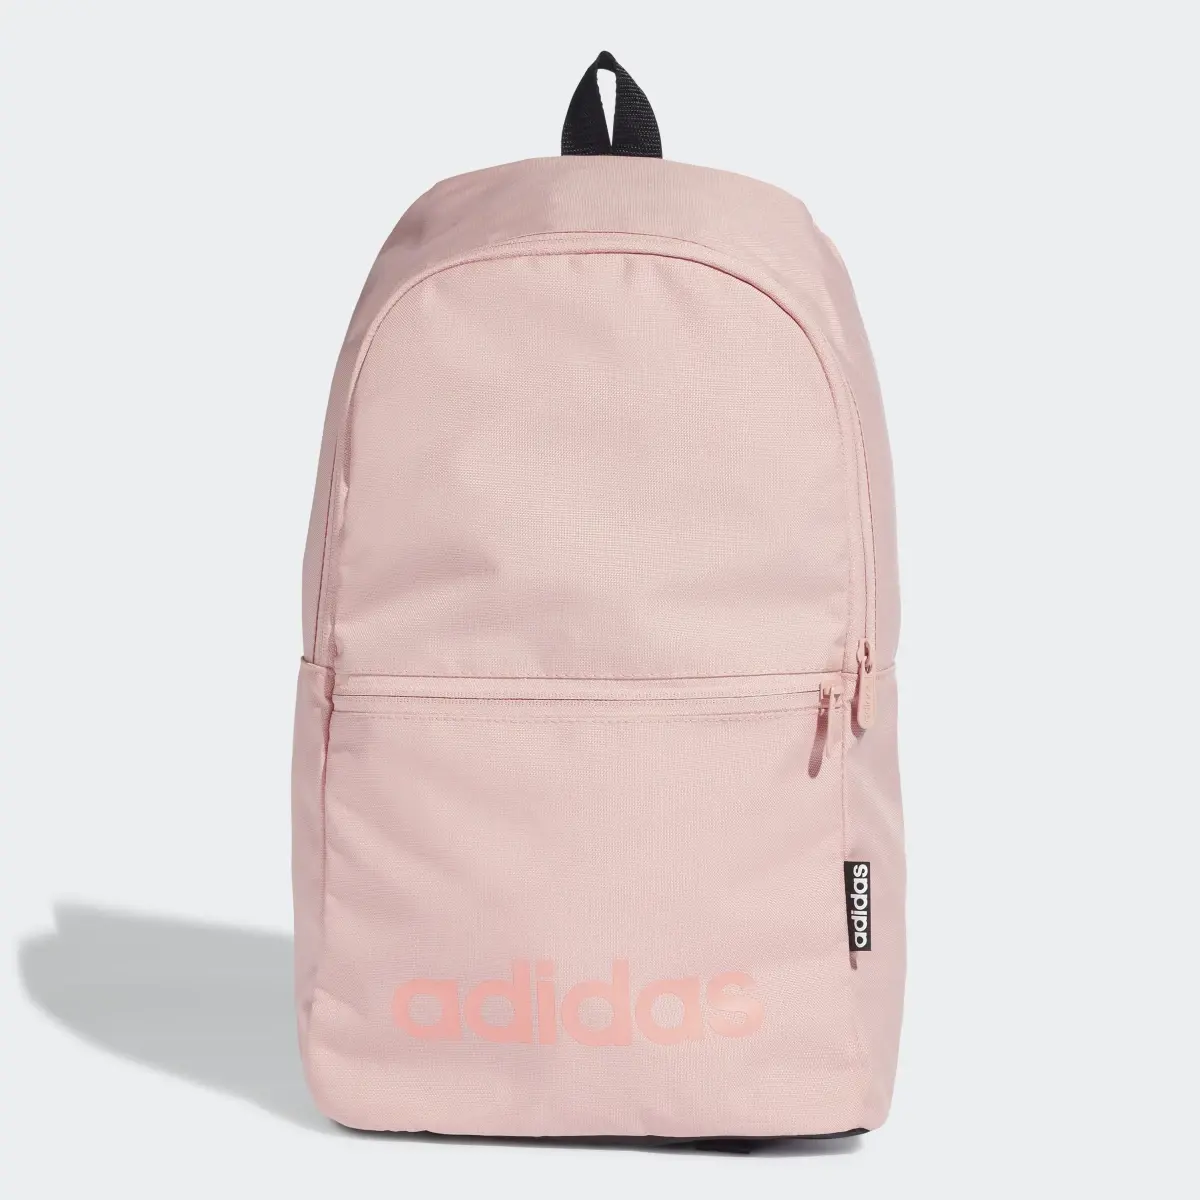 Adidas Linear Classic Daily Backpack. 2